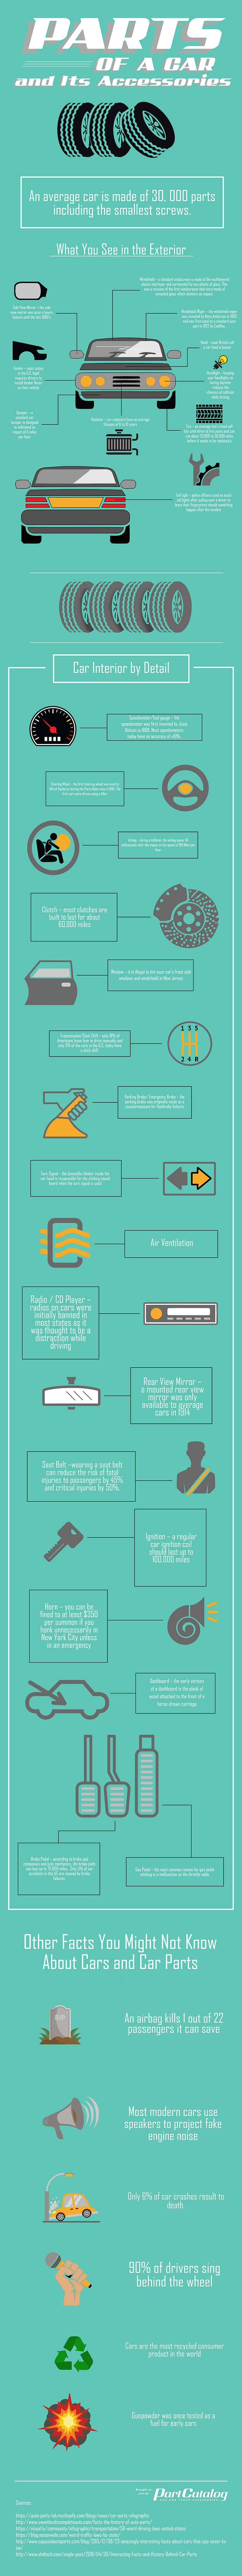 The Ultimate Guide to Car Parts & Accessories #infographic